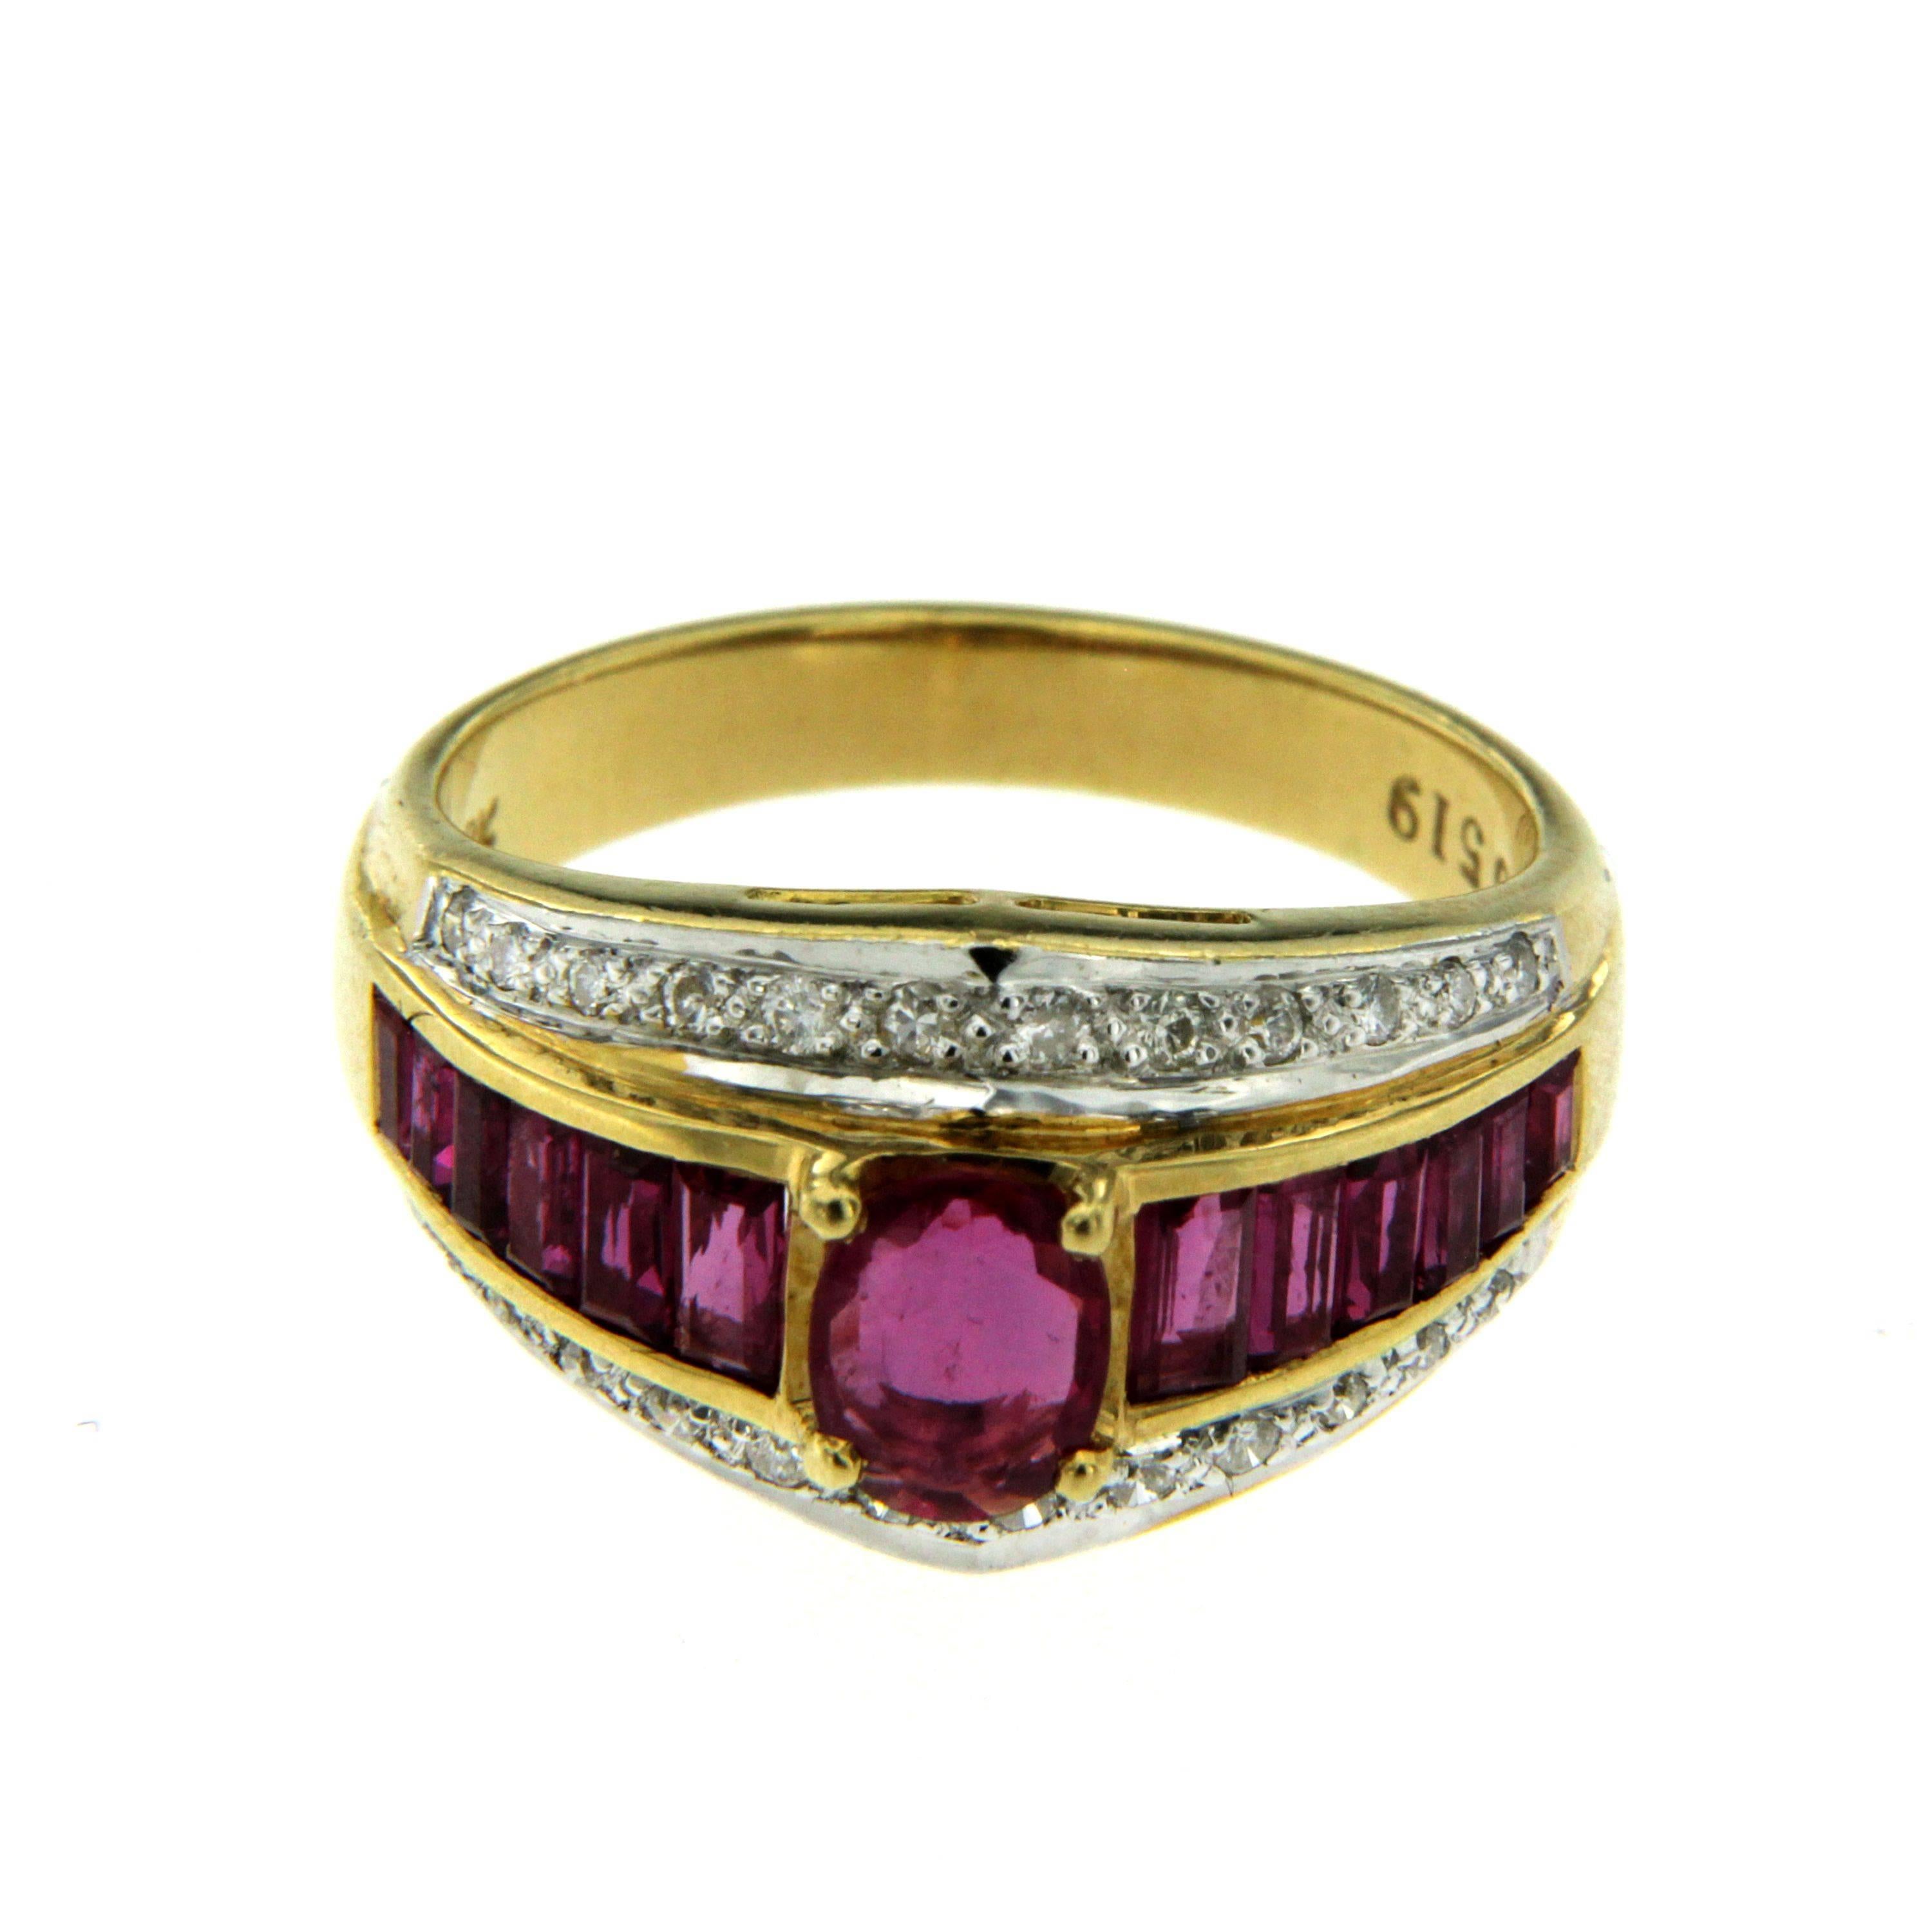 Beautiful Retro Ring handcrafted in 18k yellow Gold. The center is set with a oval Ruby accented by 12 baguette cut Rubies 2.00 total carats and 24 round brilliant cut diamonds approx. 0.30 total carats. Circa 1950

CONDITION: Pre-owned -